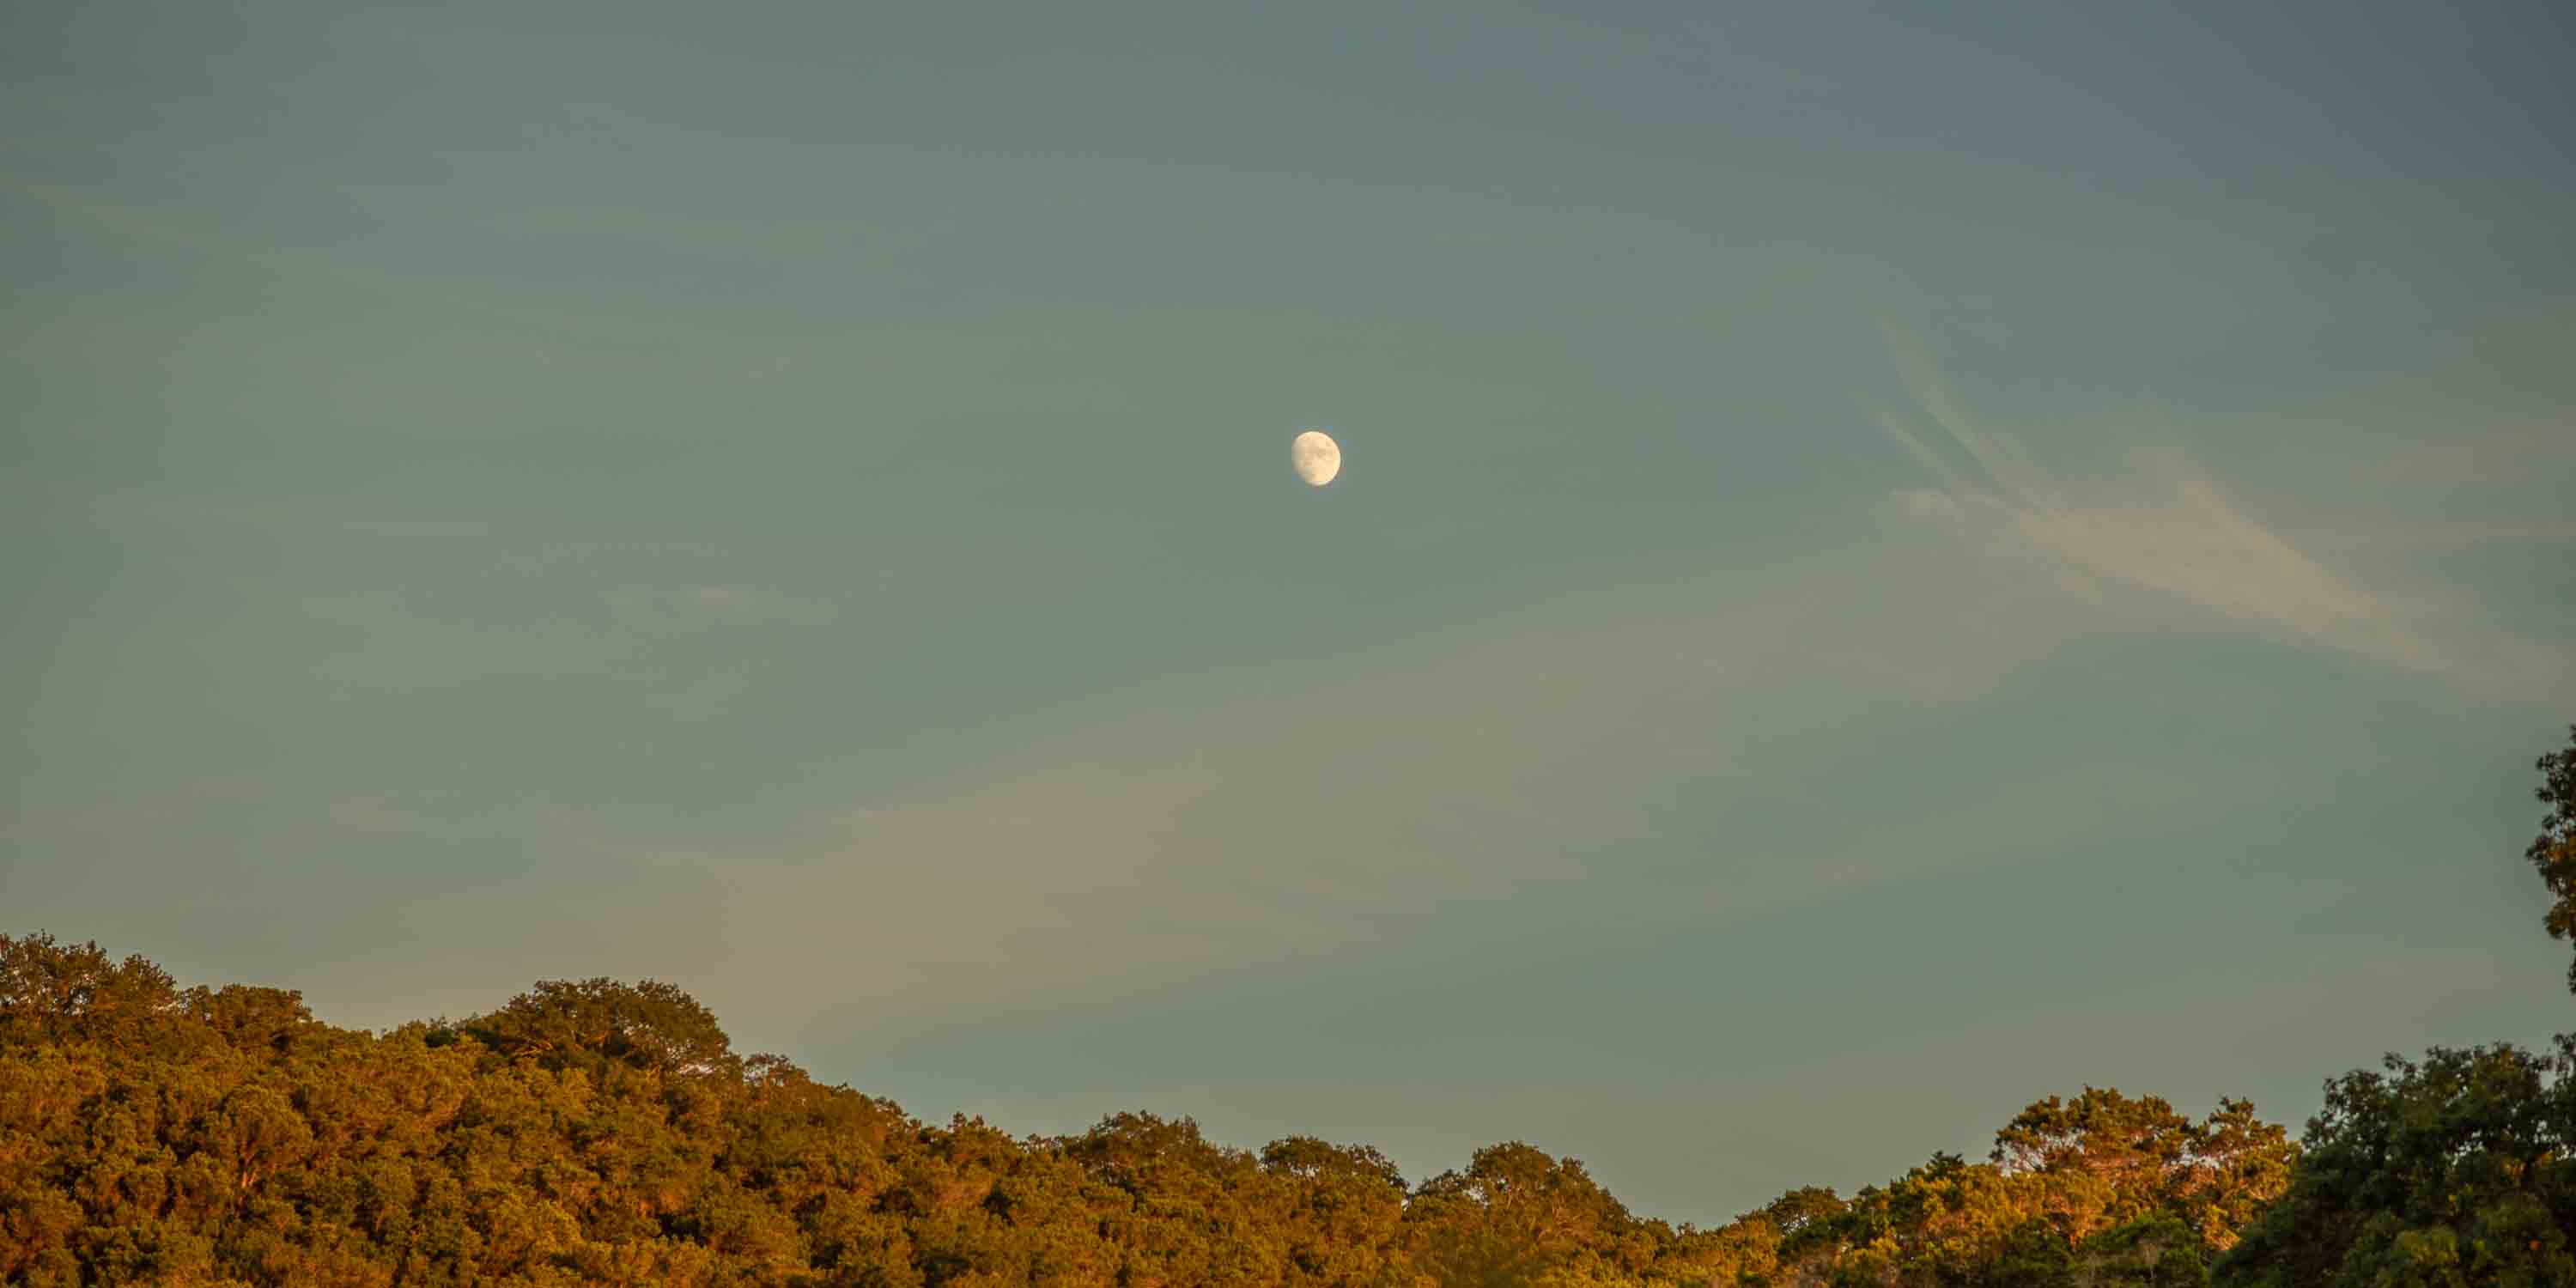 The moon in the sky above Camp Fimfo